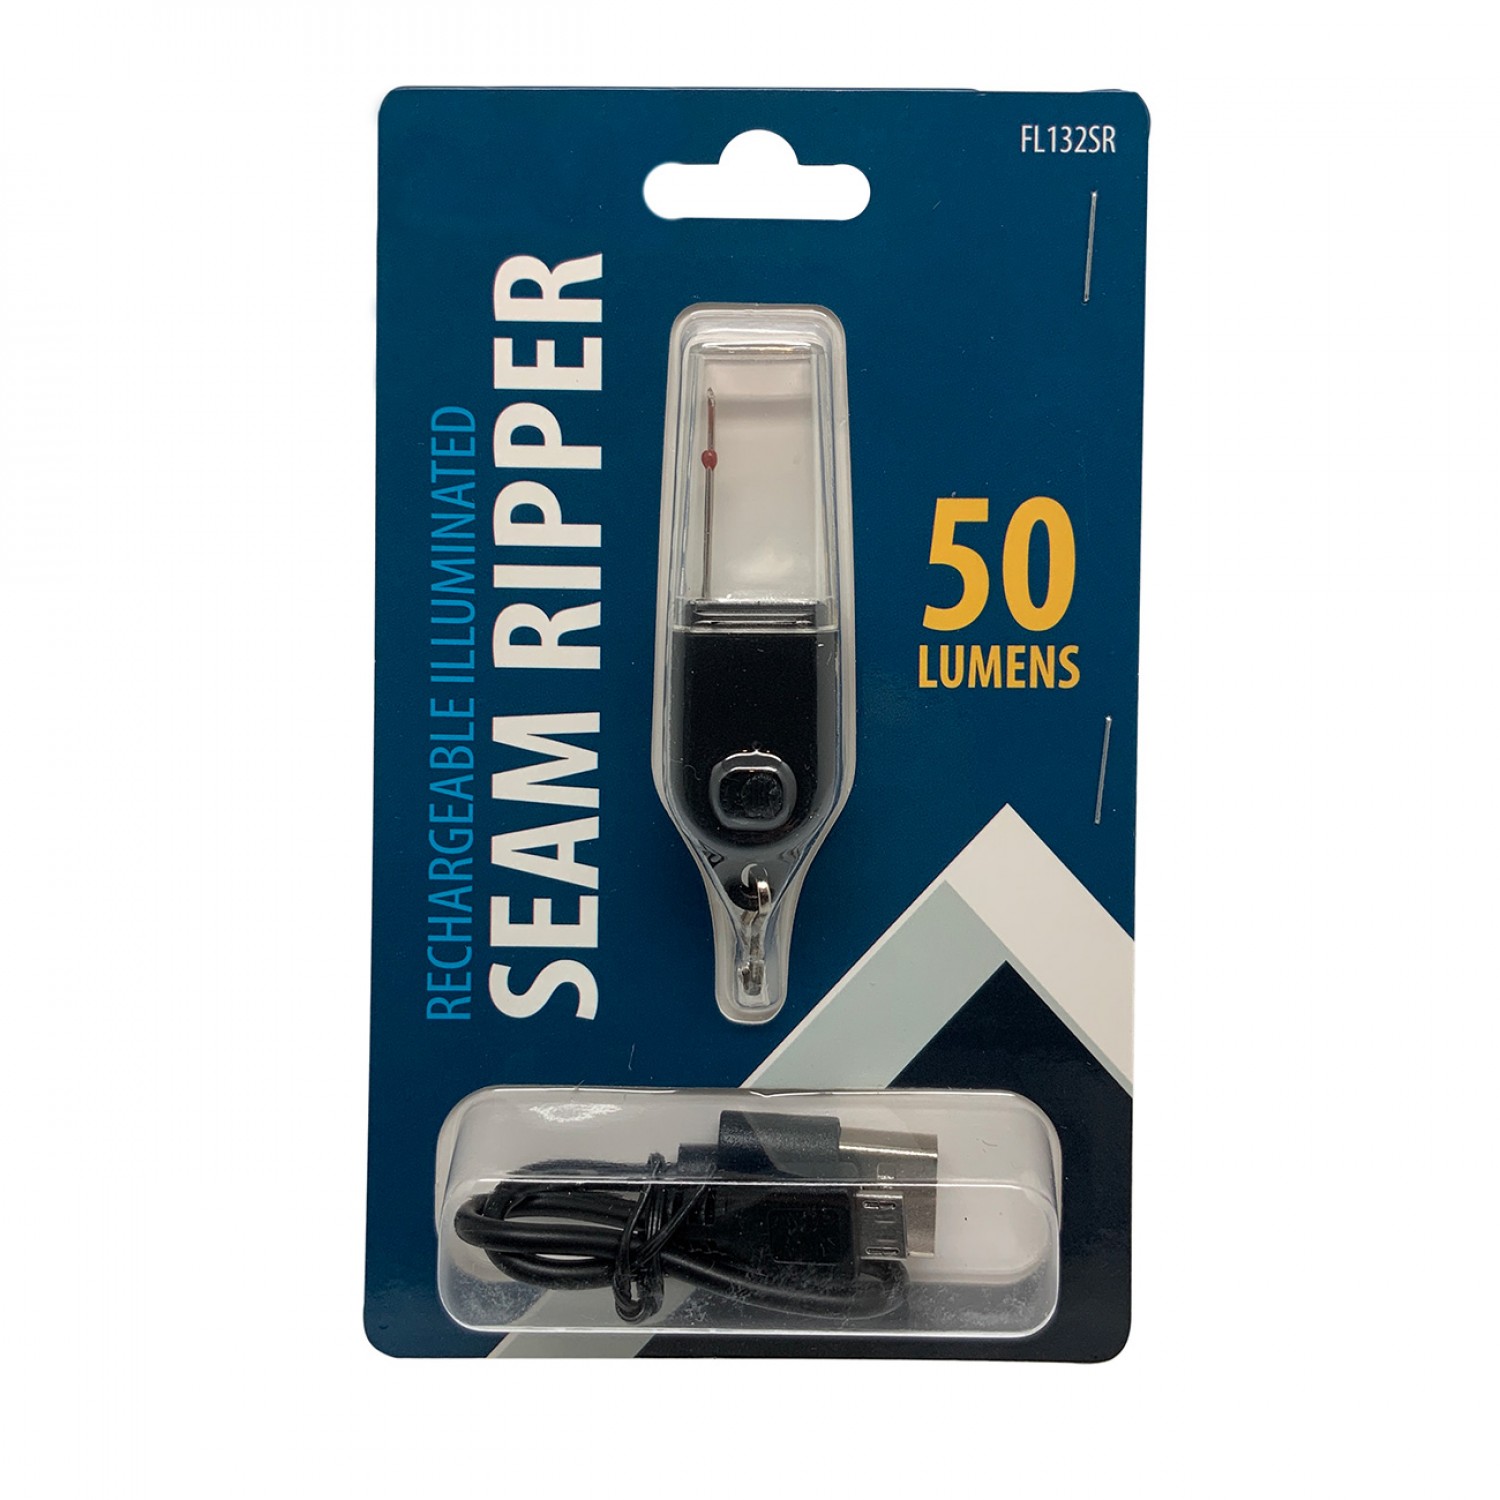 Graphic Impressions Rechargeable Ligted USB Seam Ripper